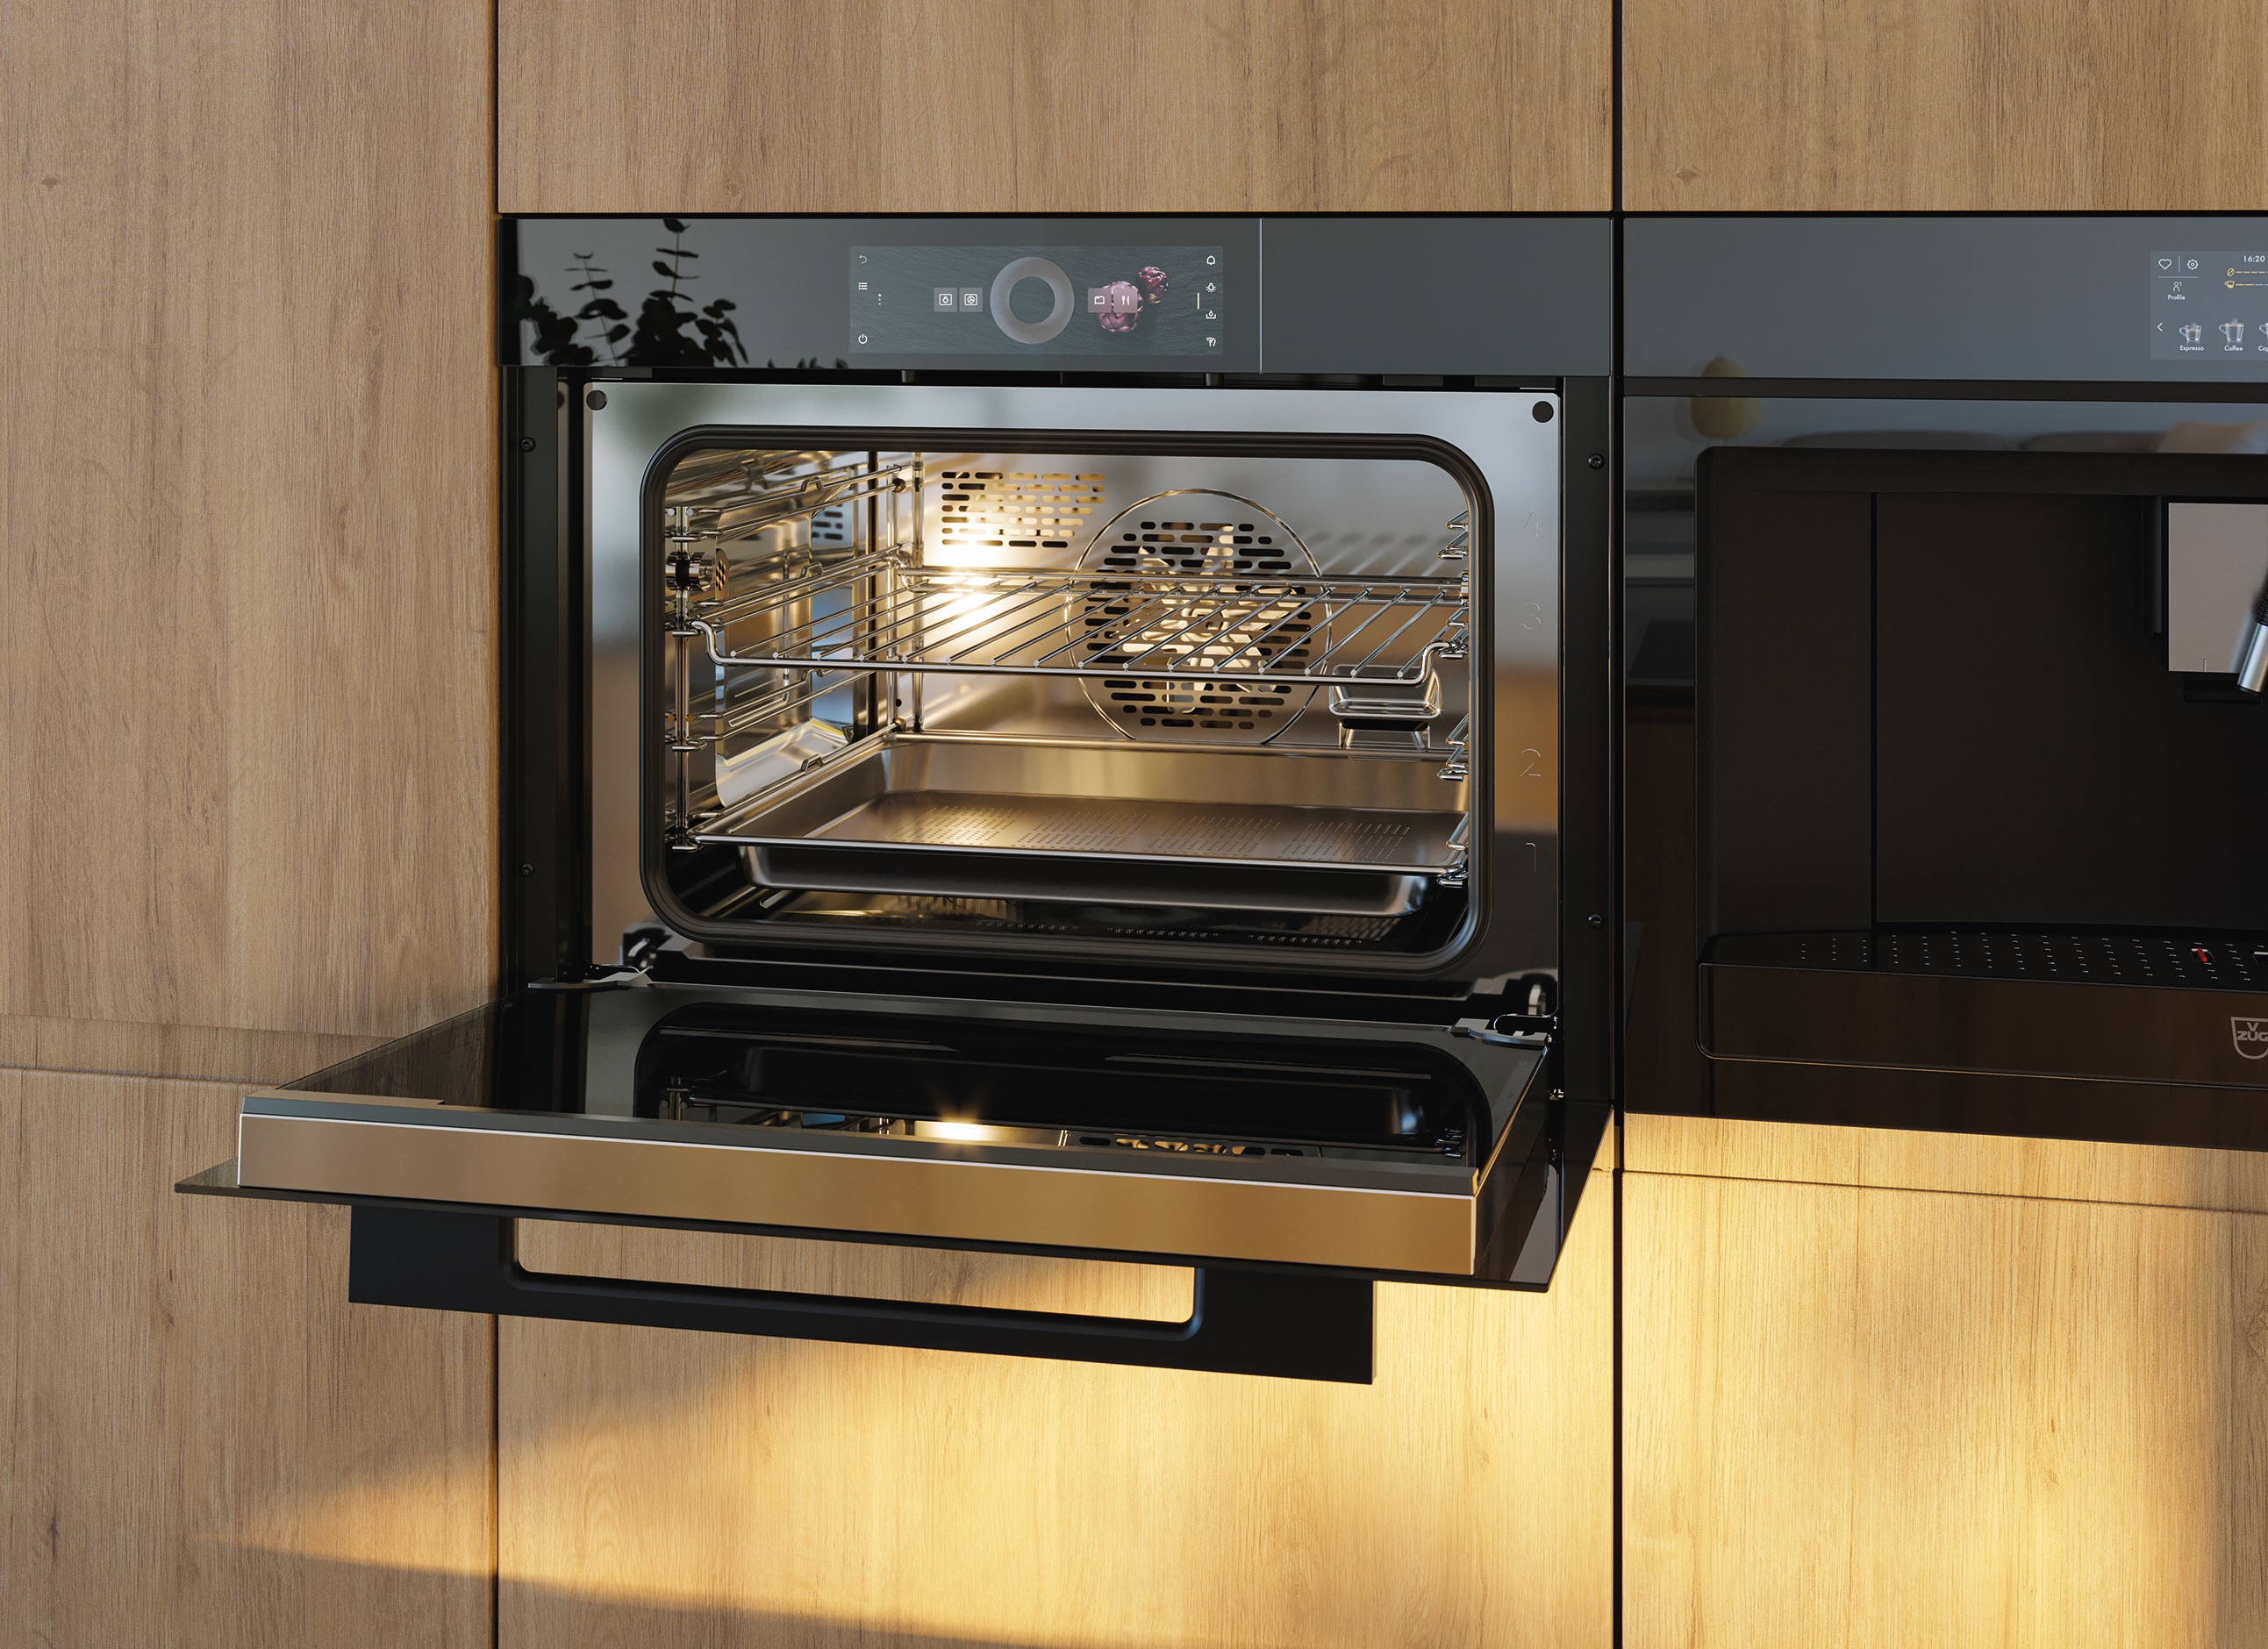 Cleaning hob and ovens: difficult has become easy